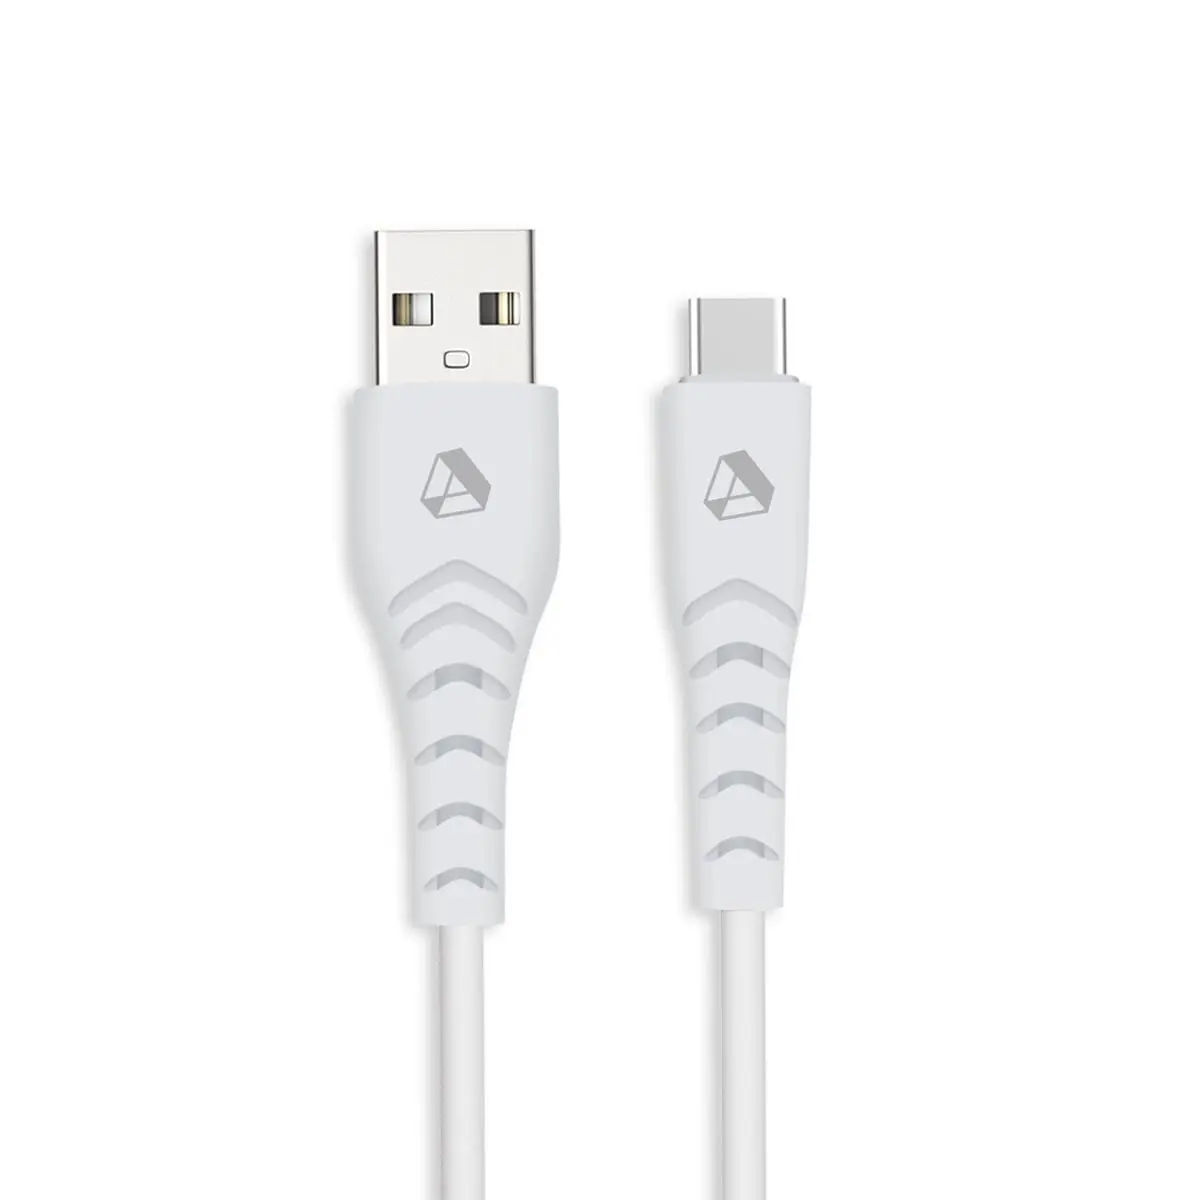 1.5m Eco-friendly USB-A to USB-C Cable: A Sustainable Solution for Your Charging Needs